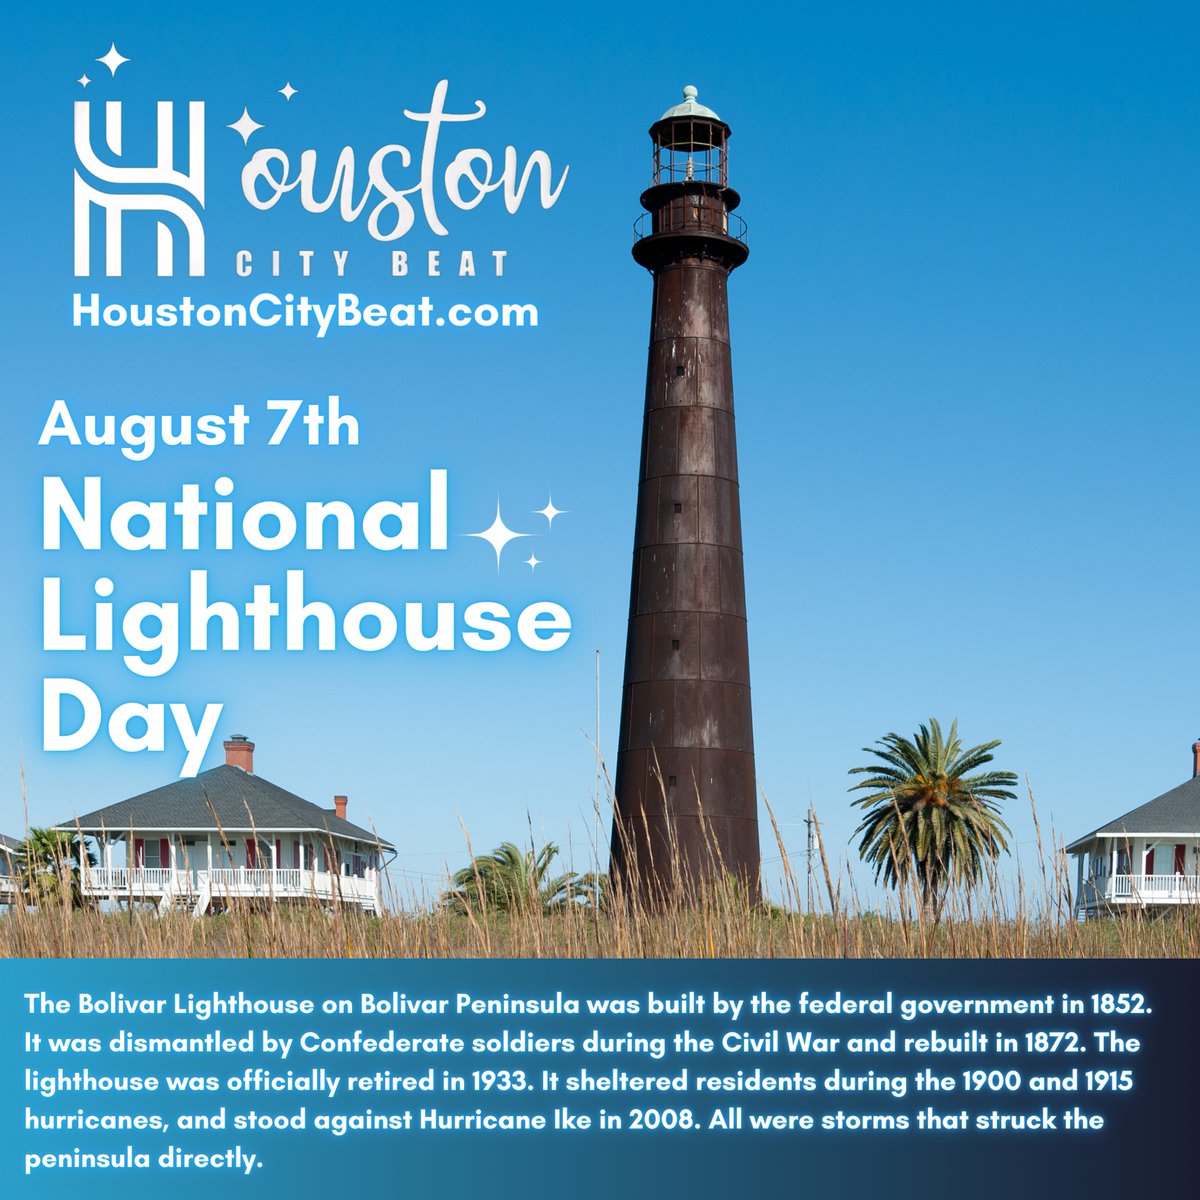 Today is #NationalLighthouseDay. The Bolivar Lighthouse is one of the most famous along the Texas Gulf Coast and a short drive away (and ferry ride) from Houston.

#bolivarlighthouse
#bolivarpeninsula
#texasgulfcoast
#hurricaneseason
#galvestonbay
#galveston
#htx
#hou